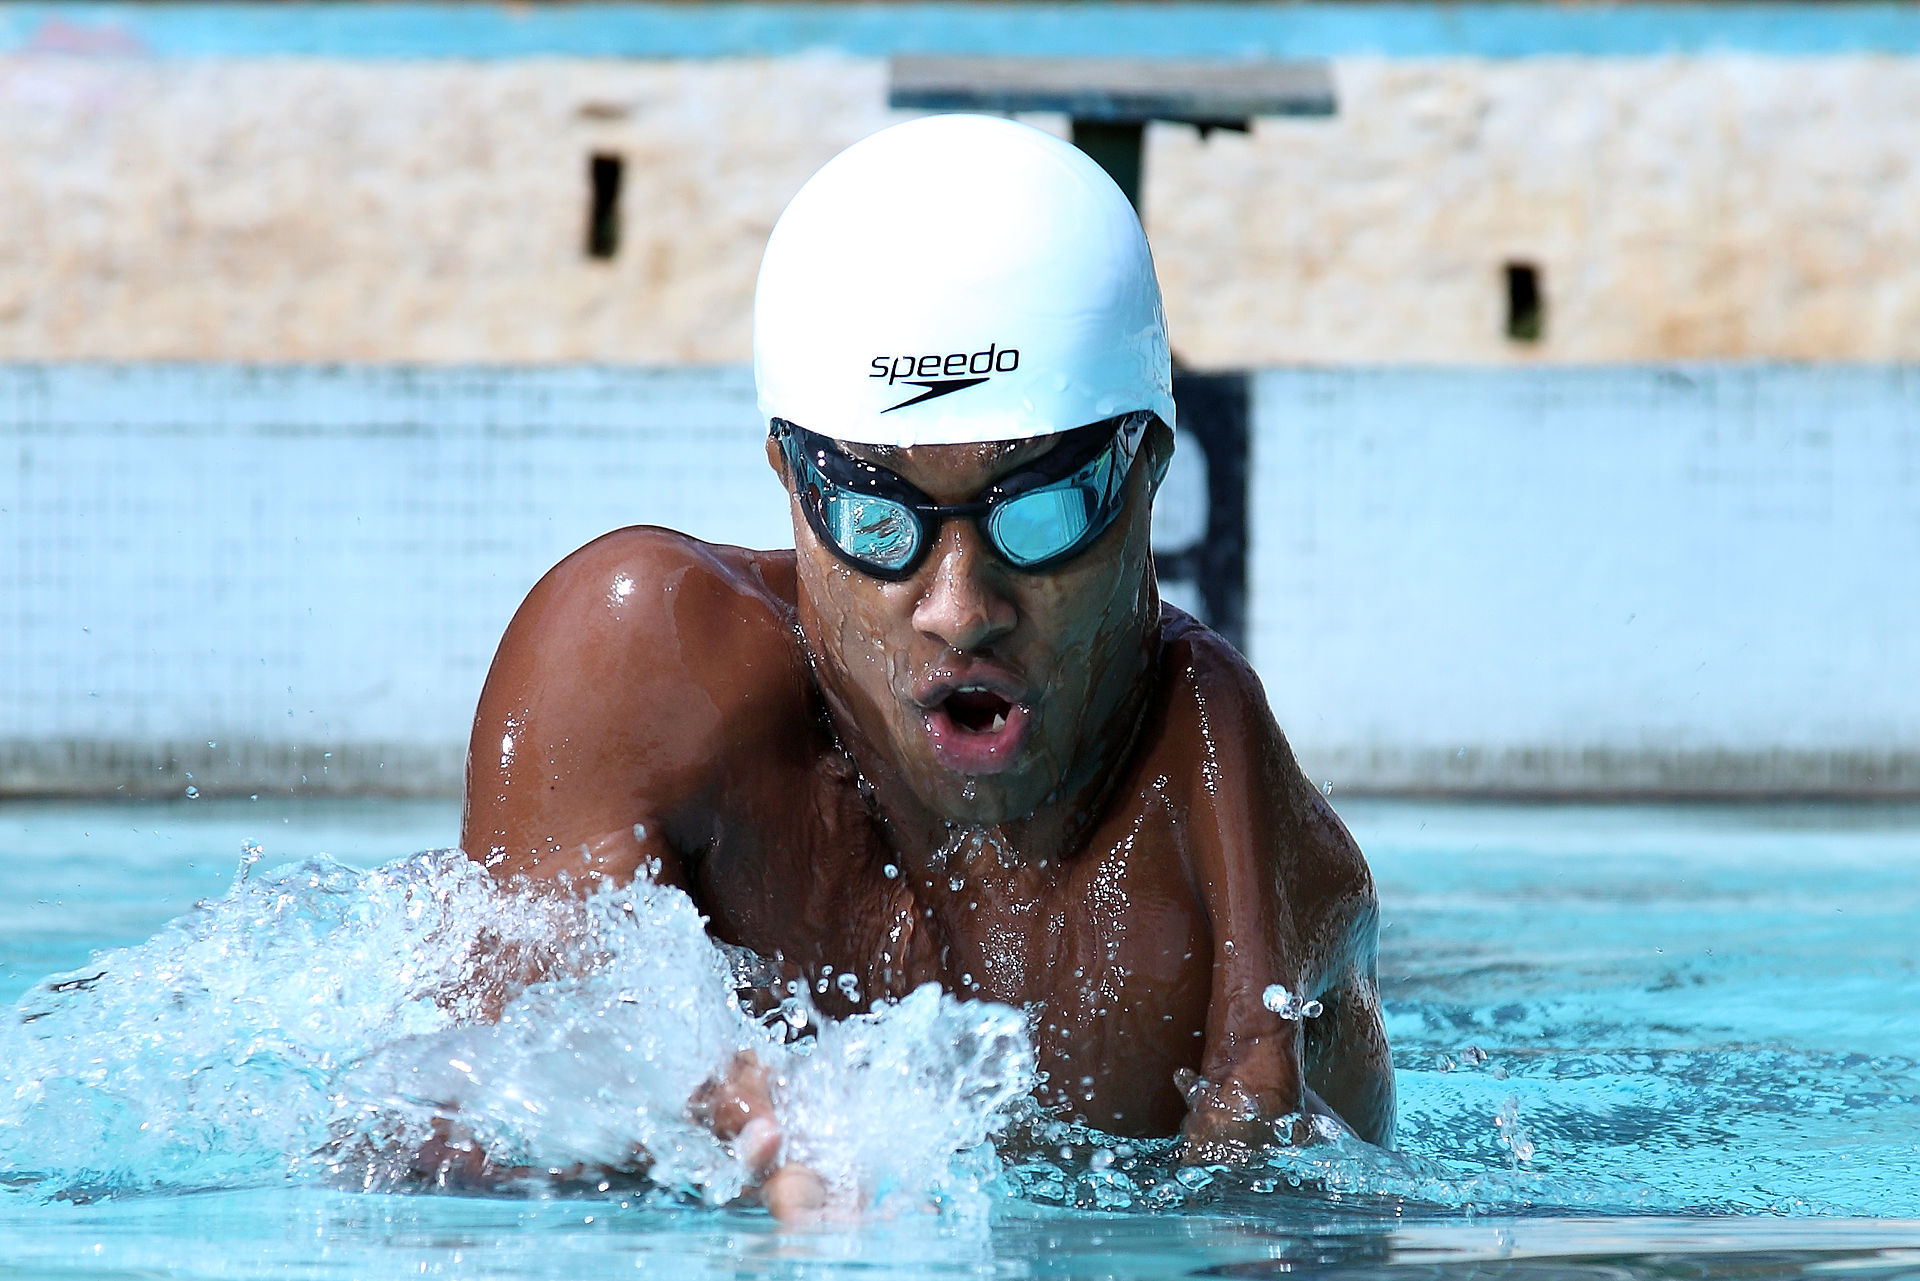 Sharath Gayakwad won five bronze and one silver medal at Incheon 2014 ©Wikipedia